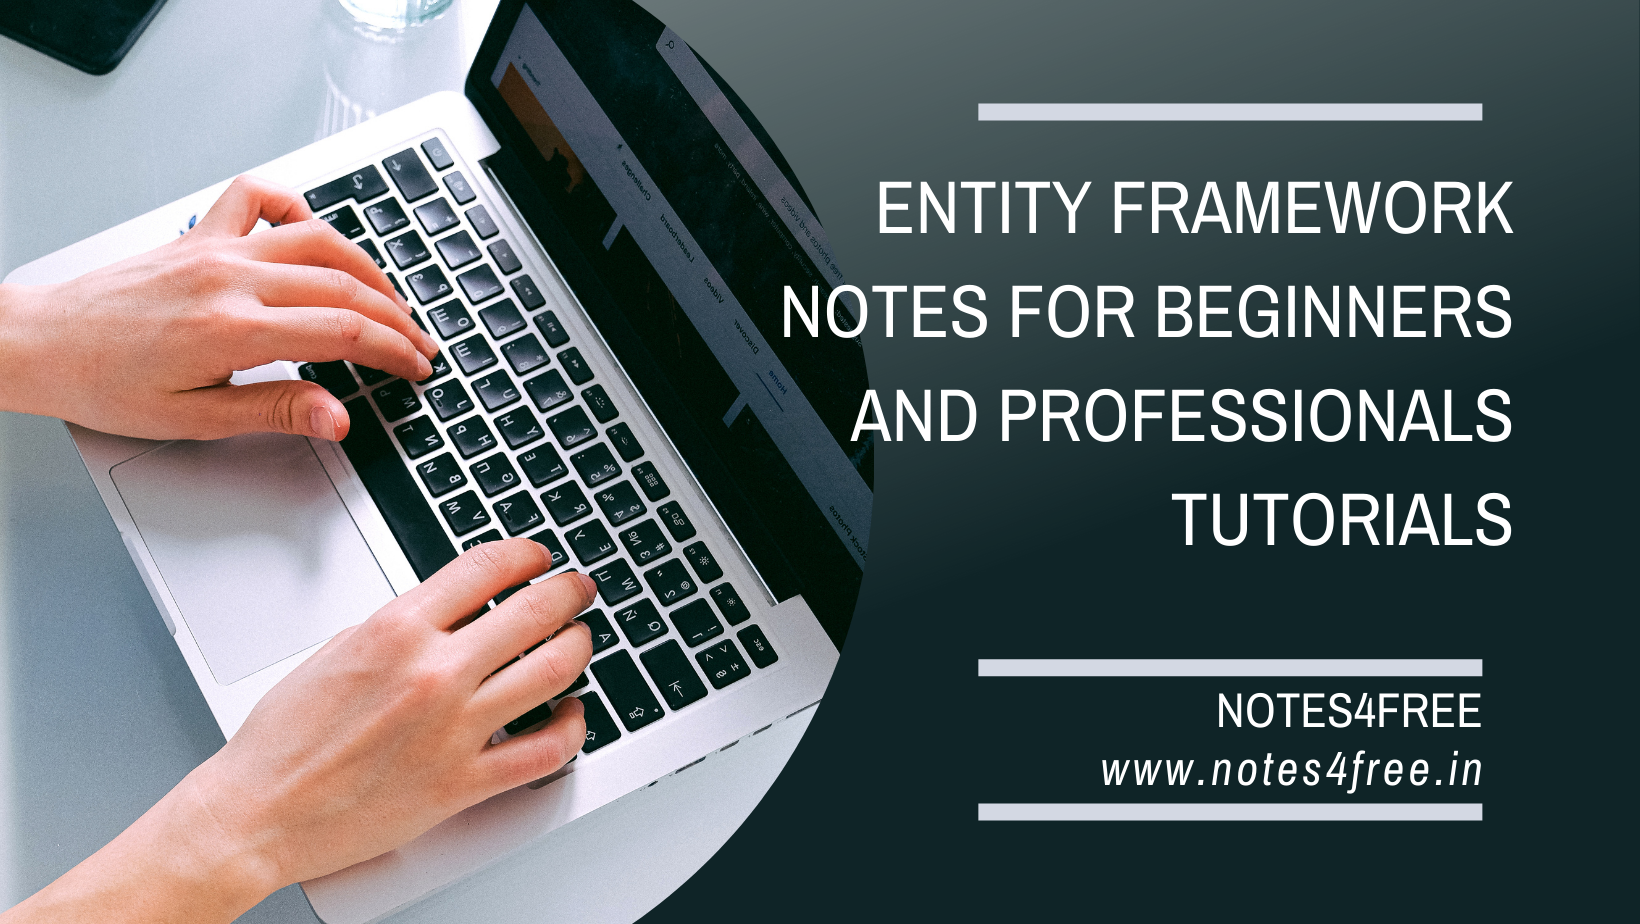  Entity Framework Notes for beginners and Professionals books